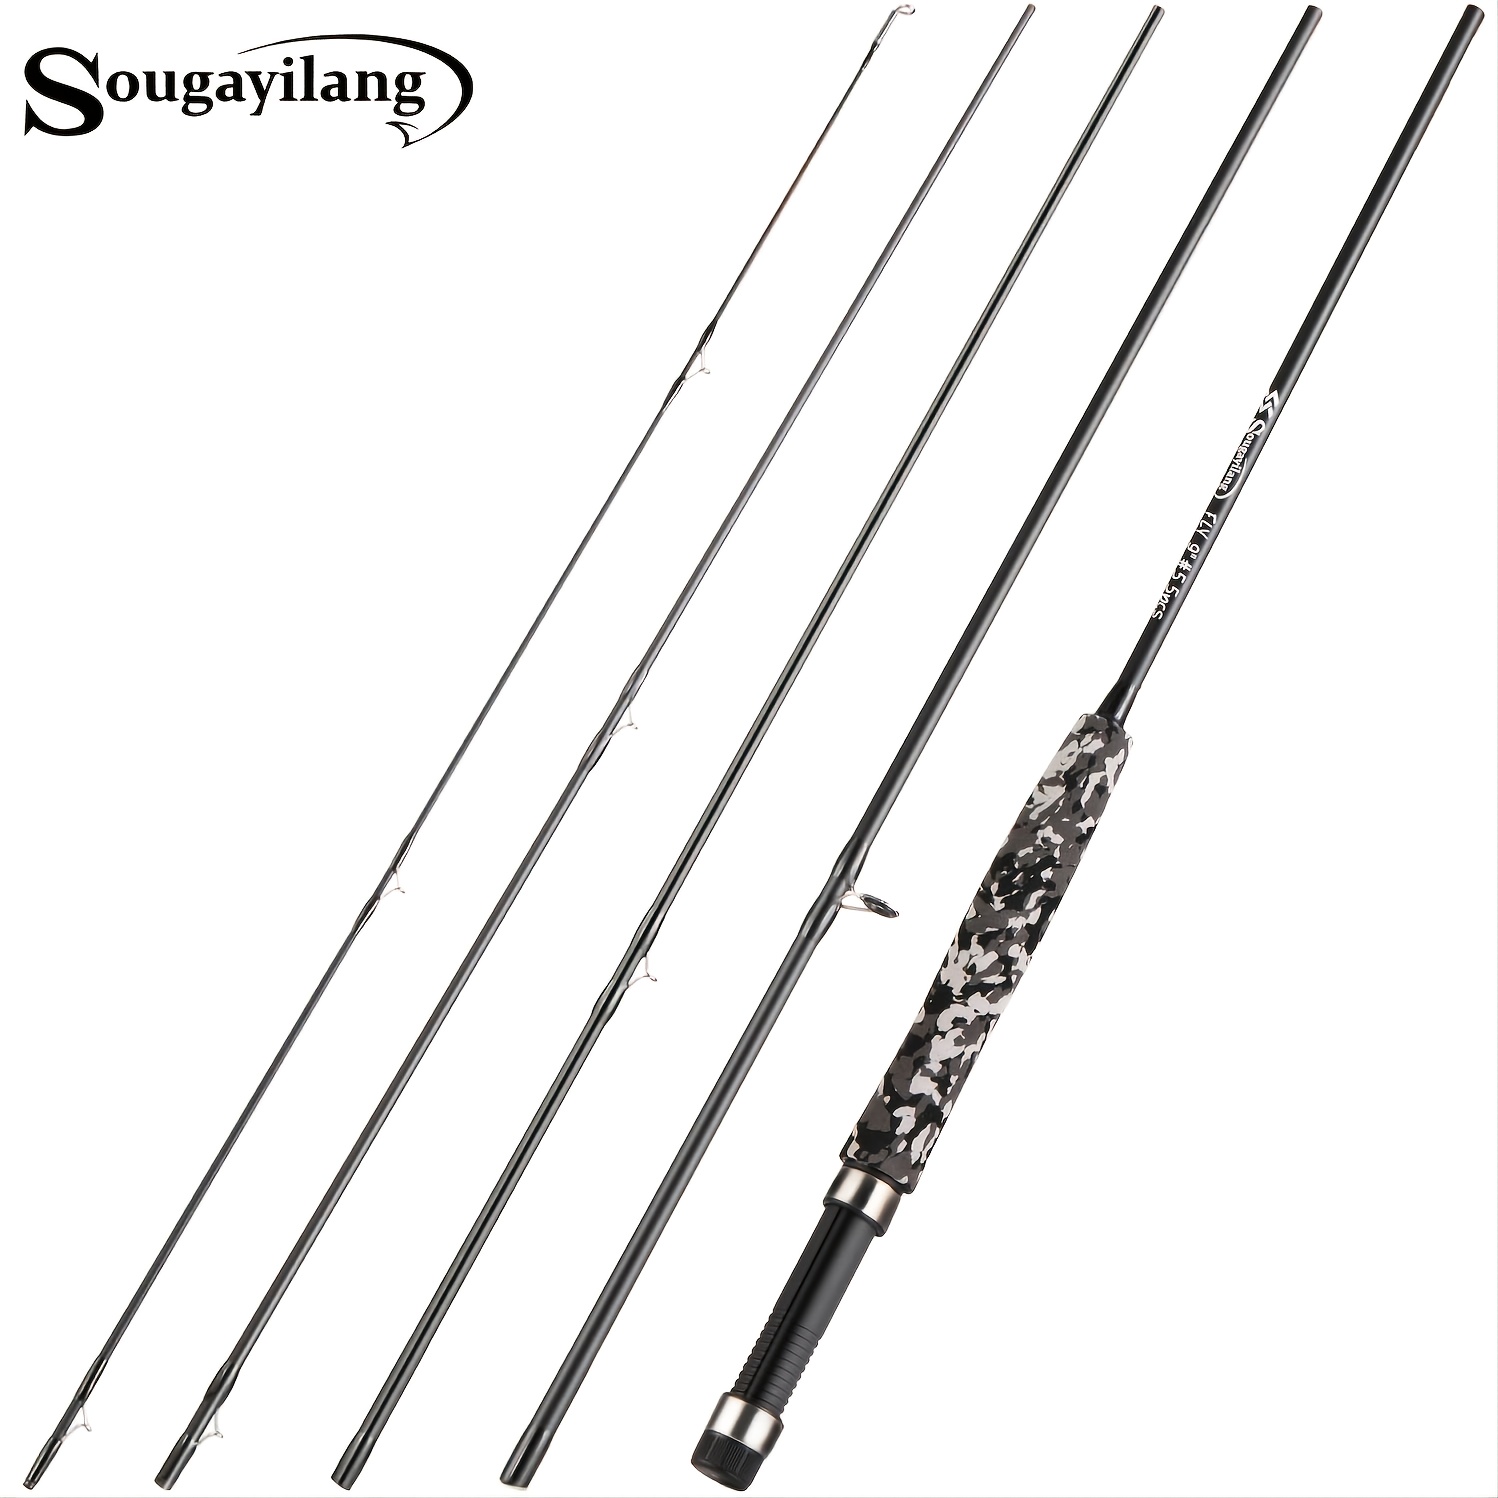 Sougayilang Fly Fishing Rods and Reels 5-sections Carbon Rod 5/6 Reels for  Trout Perch Fishing Suitable for Leisure Fishing